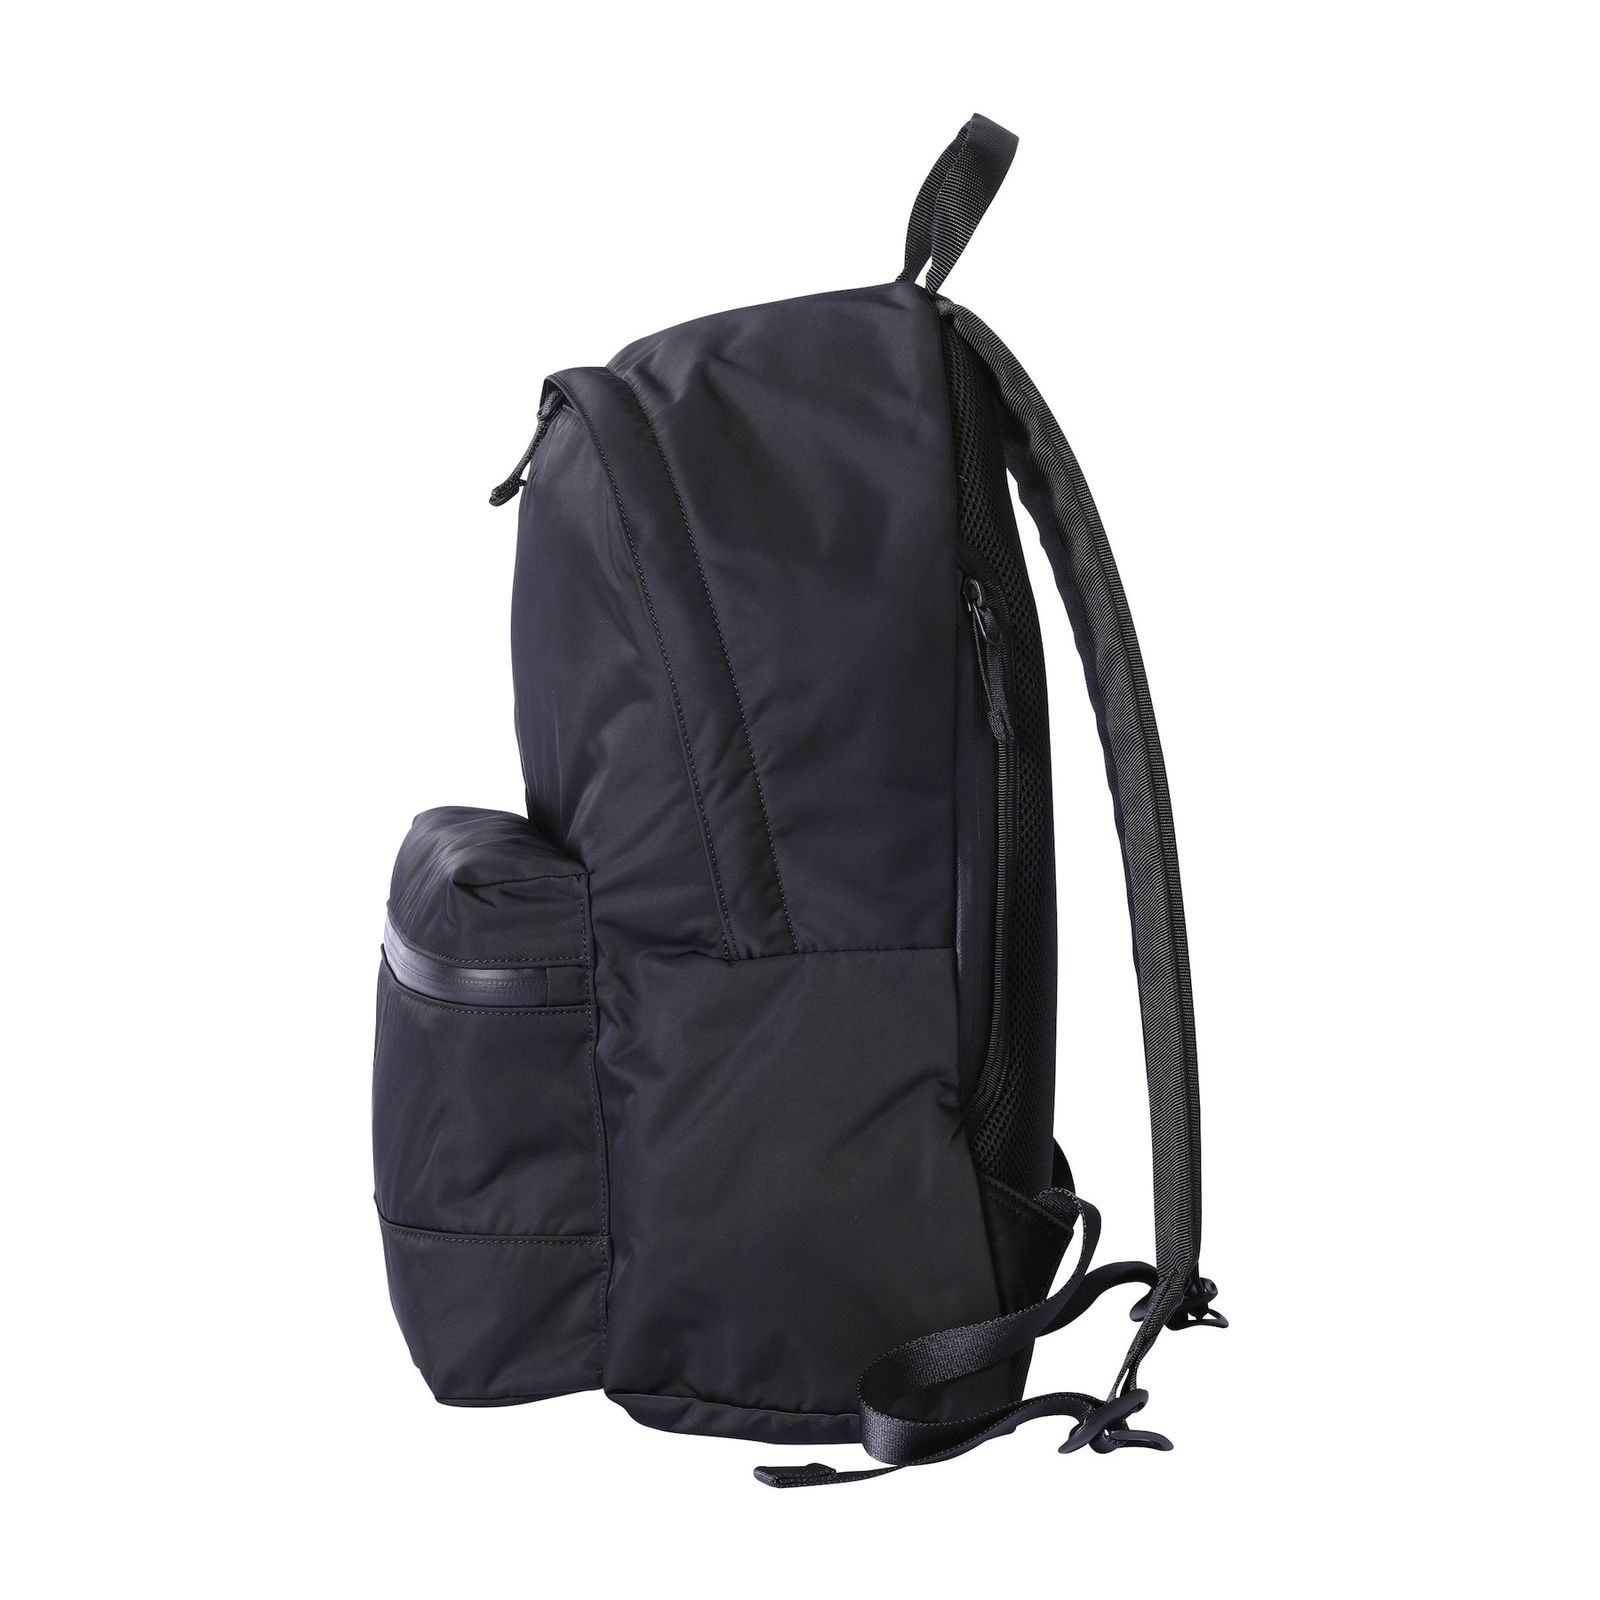 RAMIDUS - DAY PACK 【BLACK BEAUTY】 | River